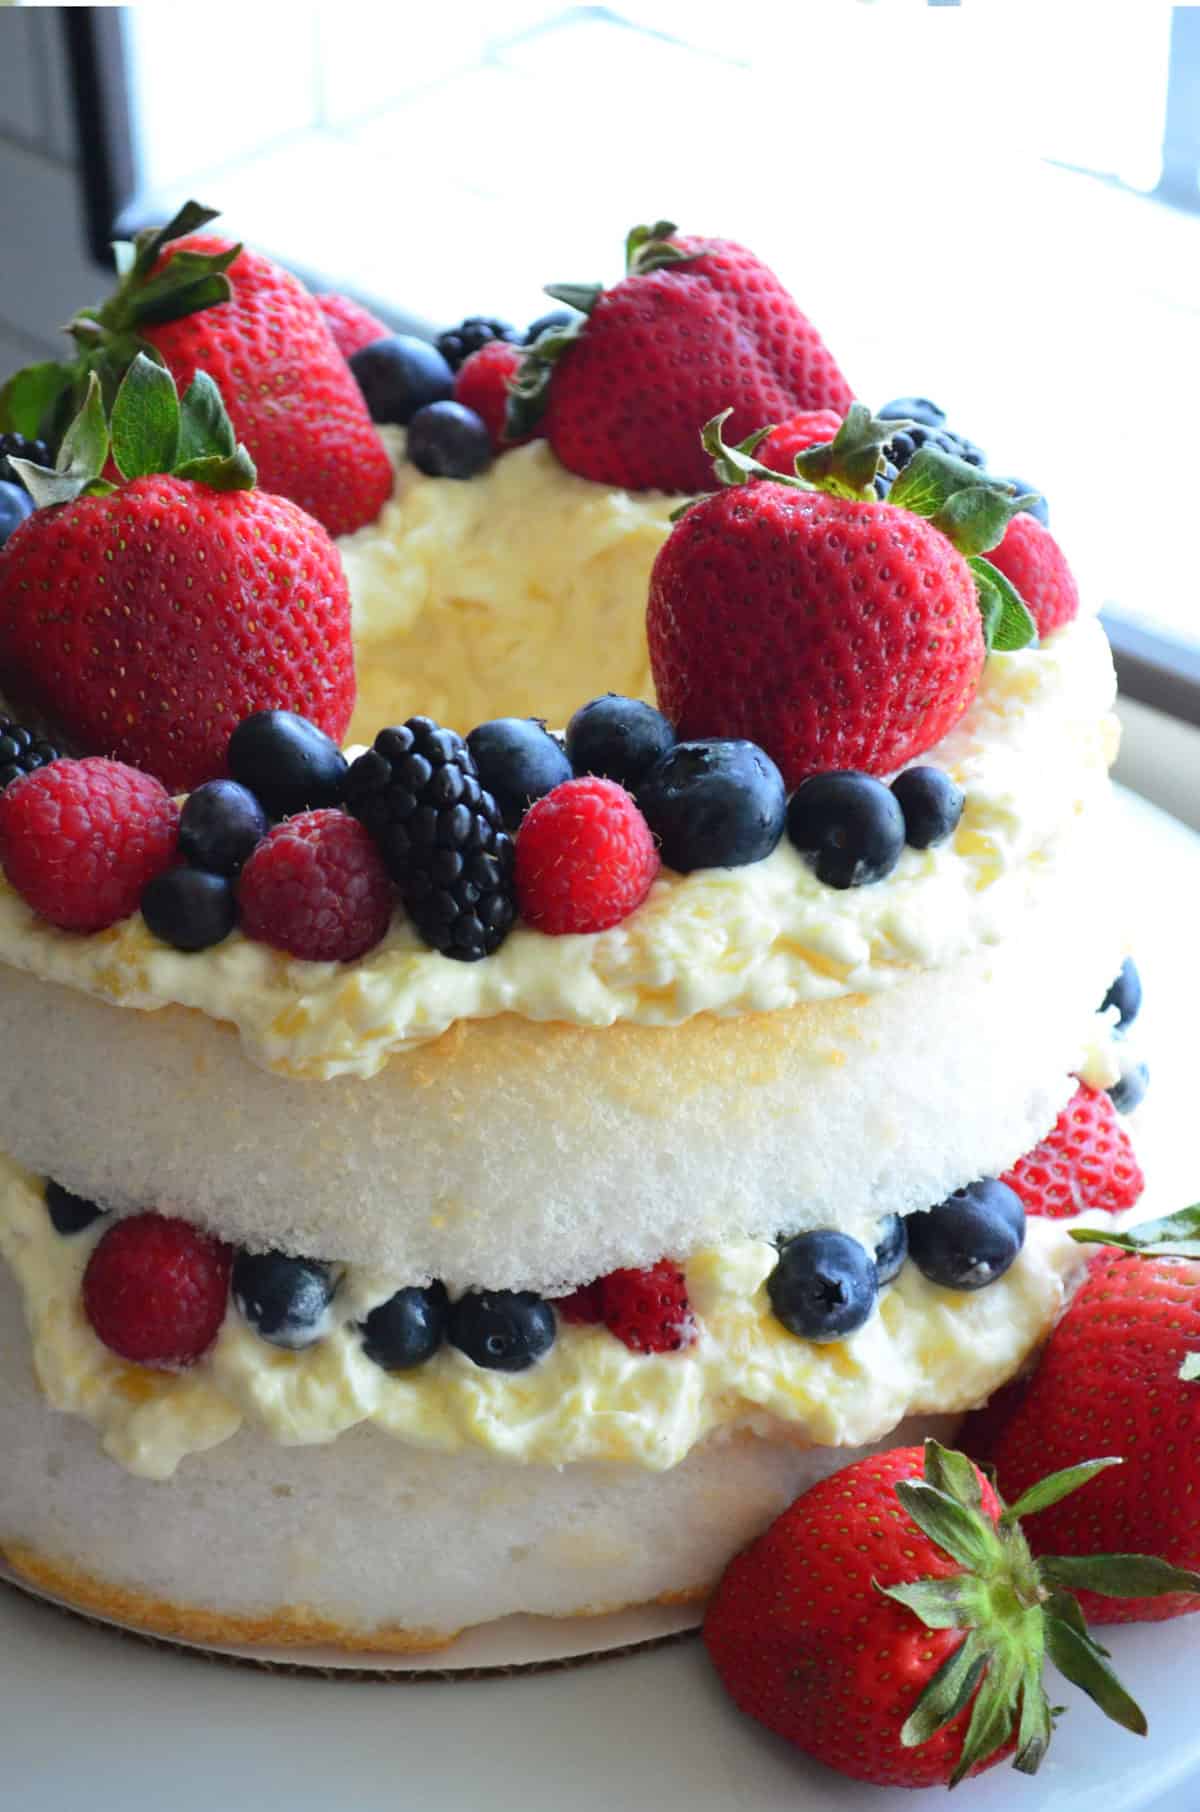 Close up of a layered cake with cream and berries on a white cake stand.